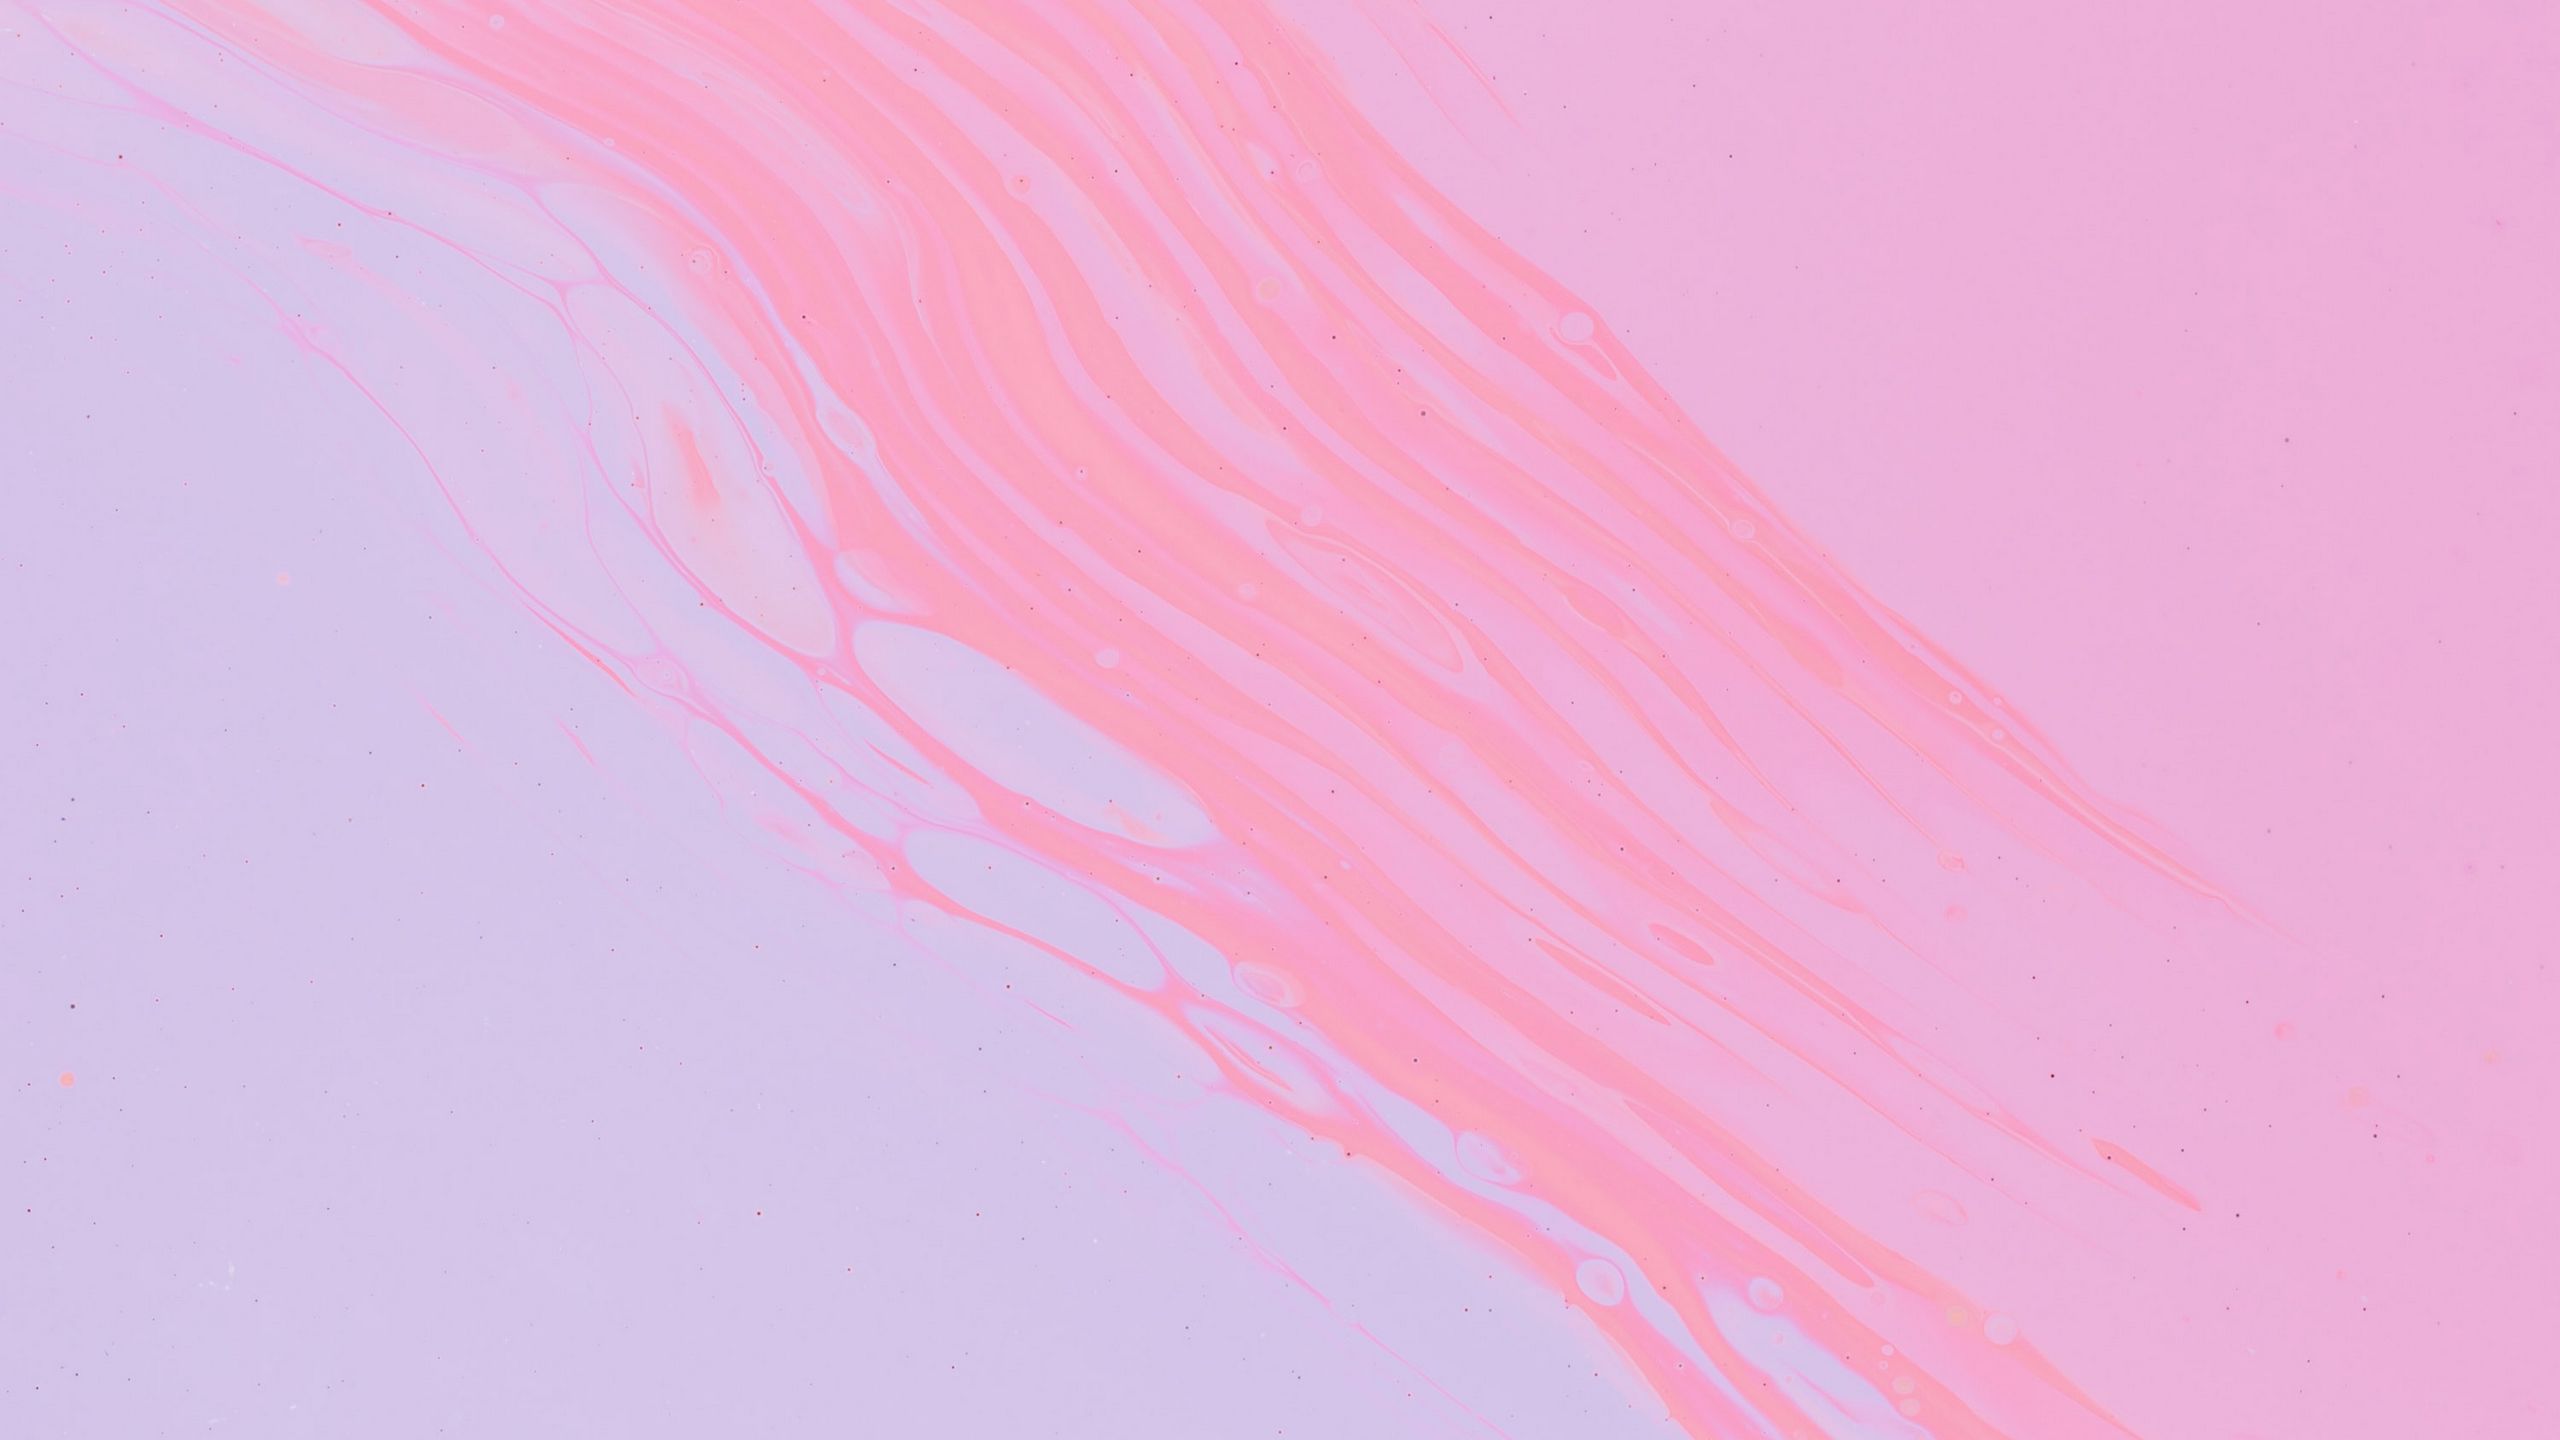 Download wallpaper 2560x1440 stains, paint, liquid, abstract, pink ...